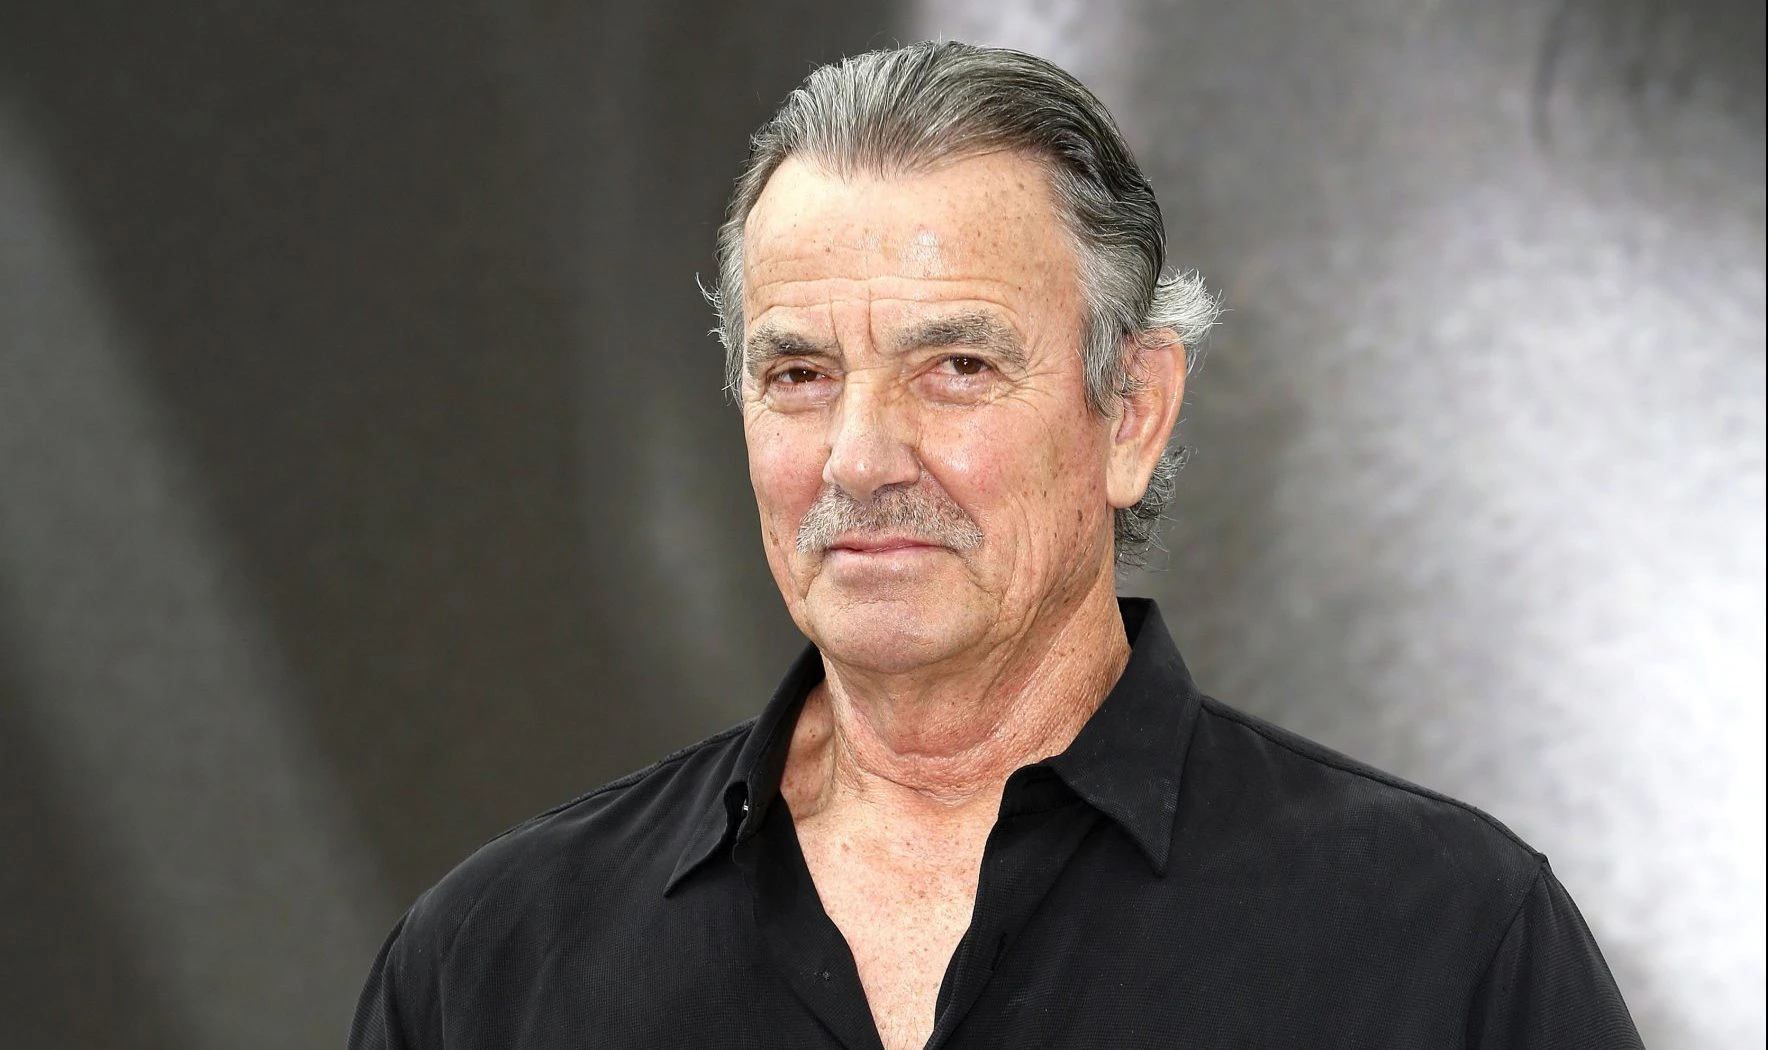 'Young and the Restless' Star Eric Braeden Reveals Cancer Diagnosis in Emotional Video 